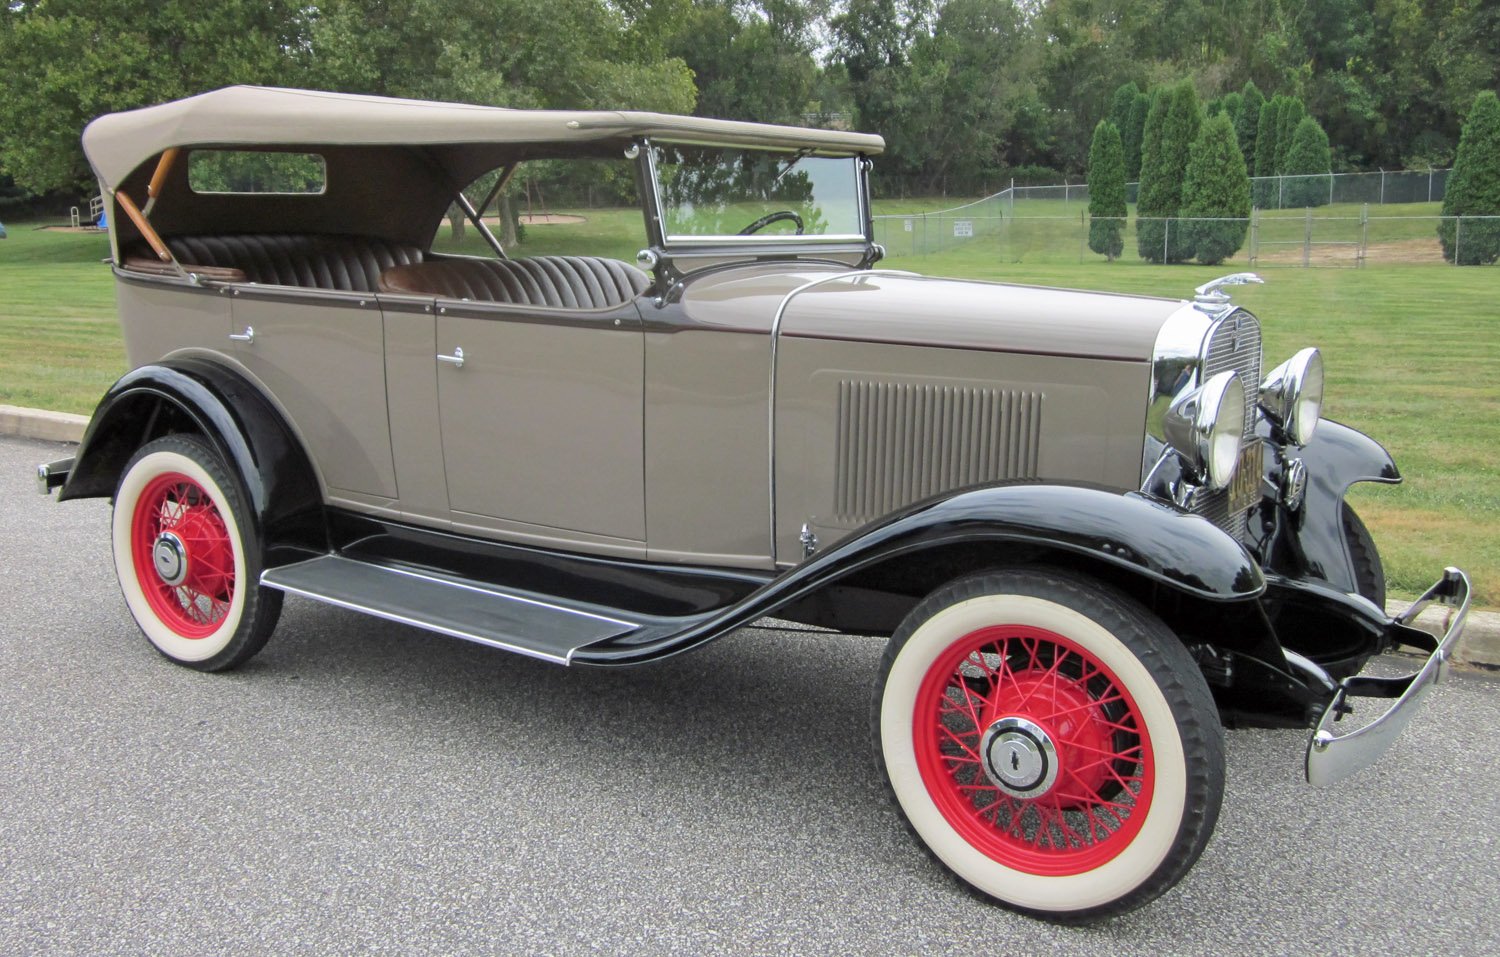 1931 Chevrolet Independence